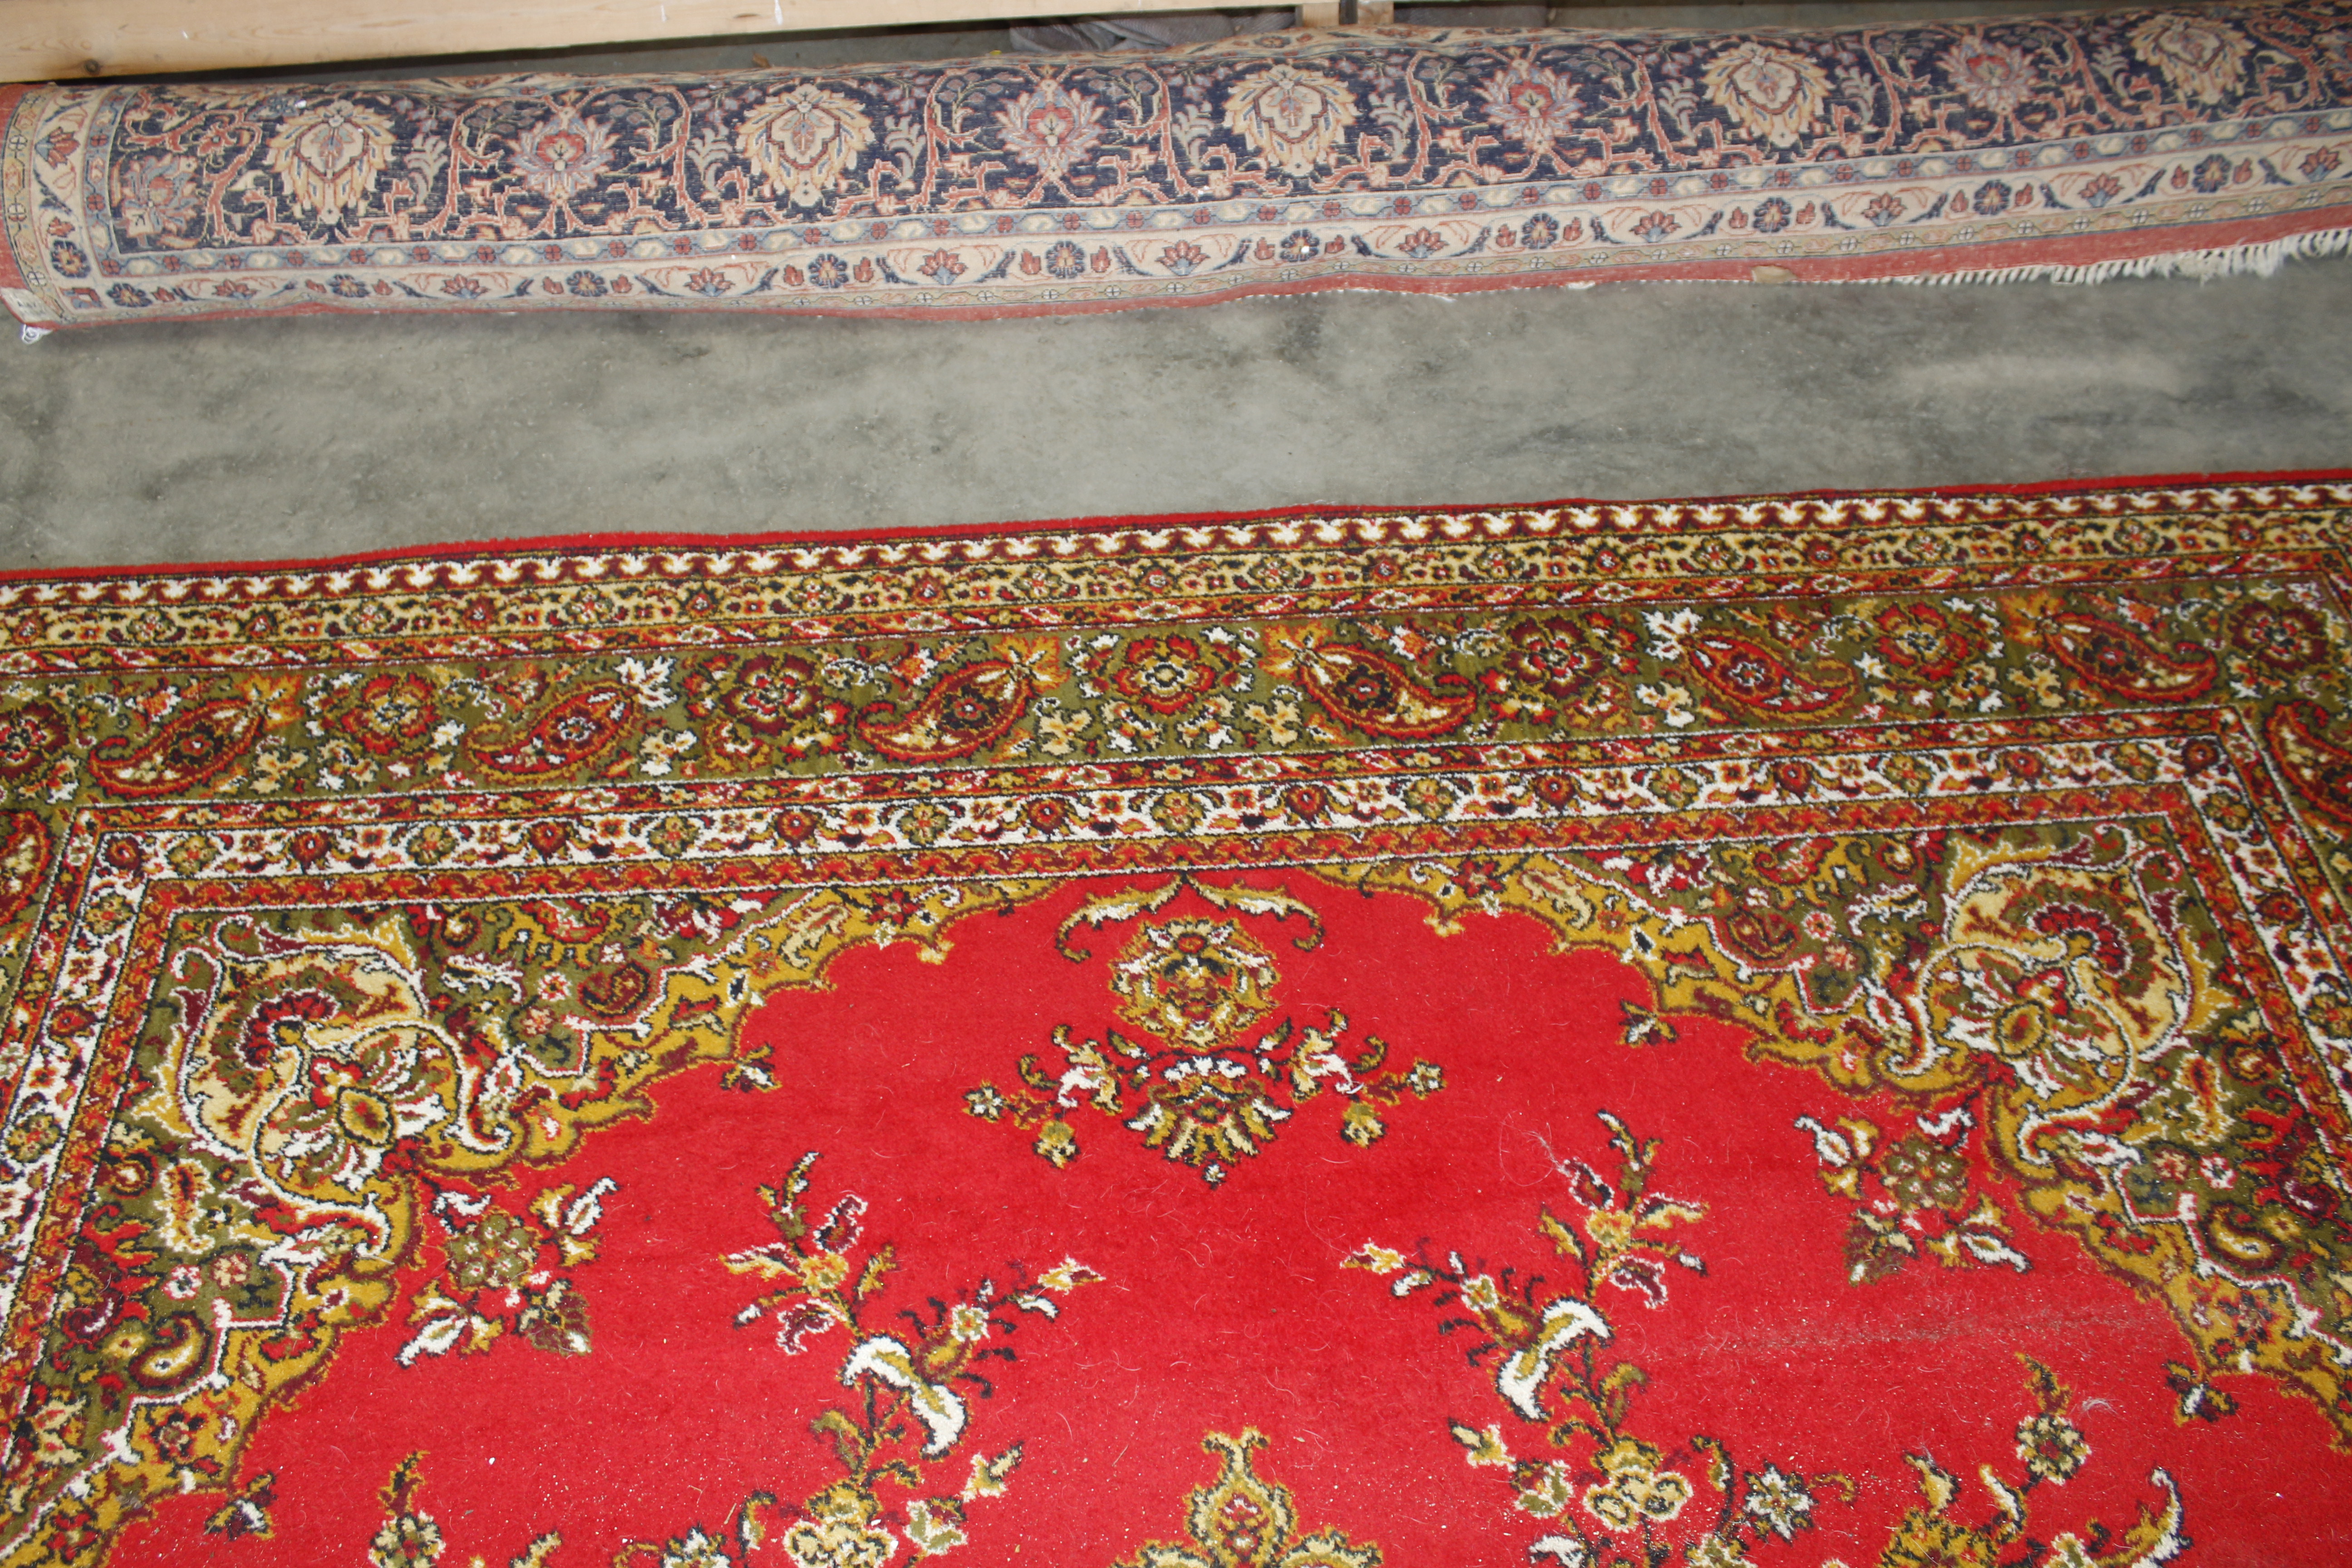 An approx. 12' x 9' red patterned rug AF - Image 4 of 11